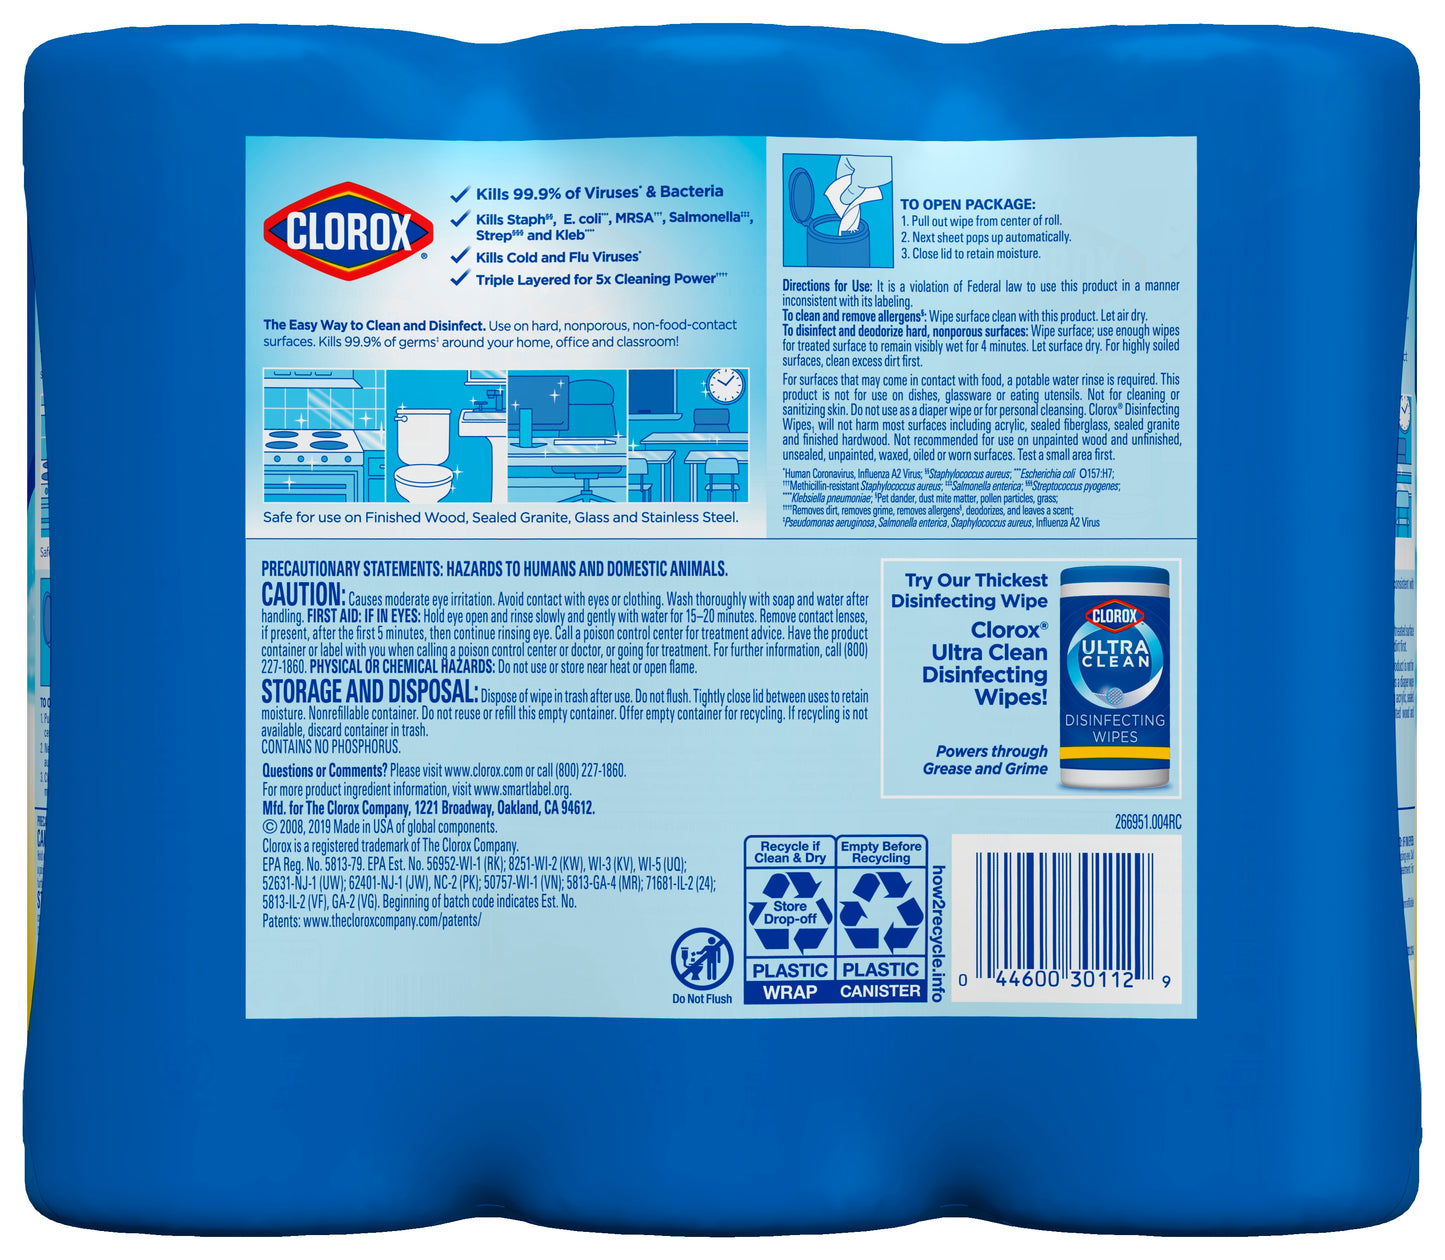 Clorox Disinfecting Wipes (105 Count Value Pack), Bleach Free Cleaning Wipes - 3 Pack - 35 Count Each